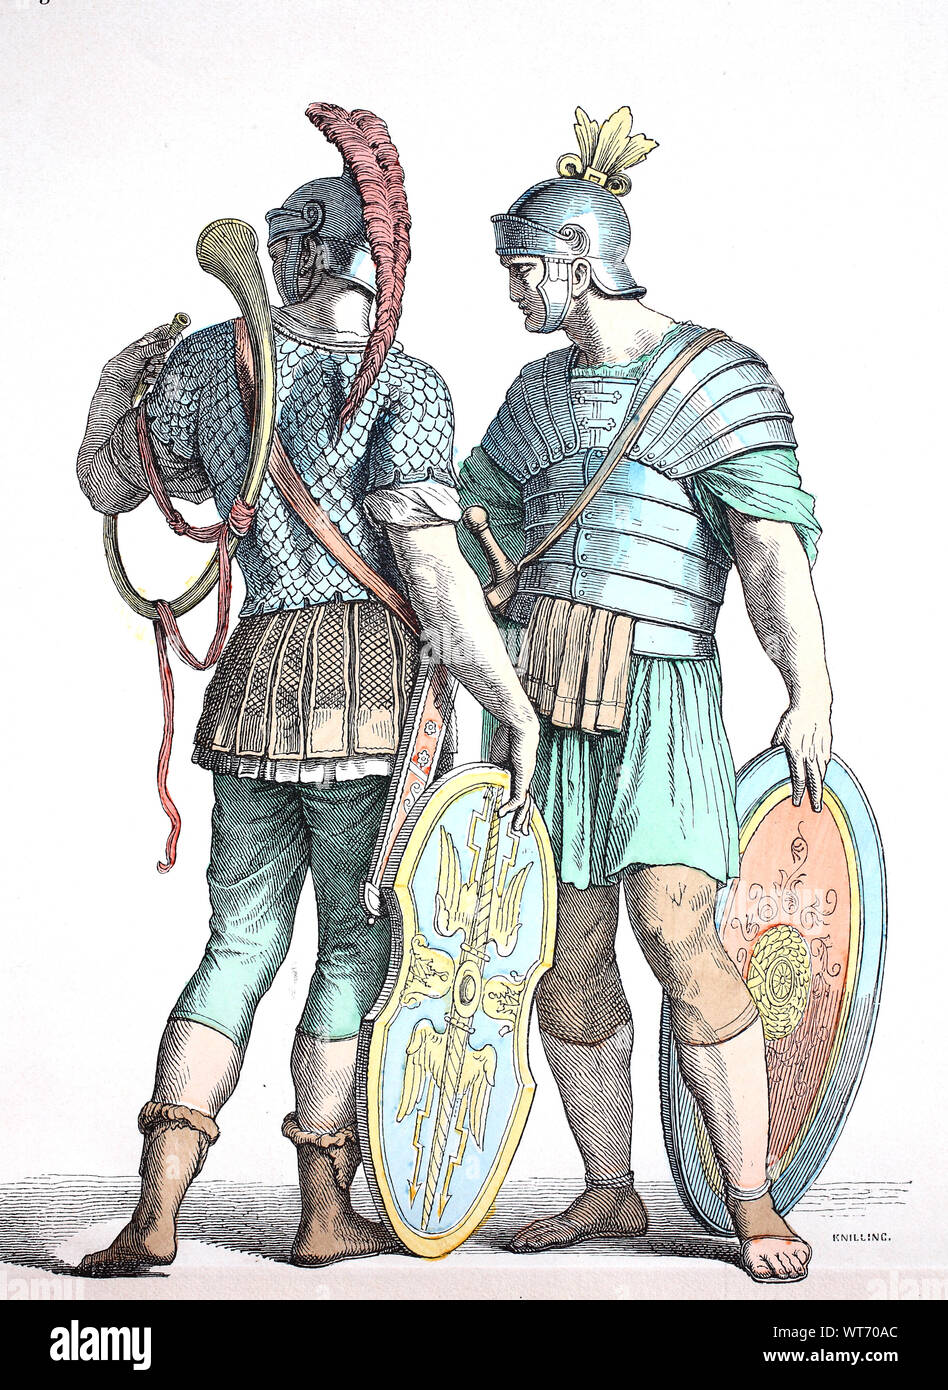 Roman Clothes High Resolution Stock Photography and Images - Alamy